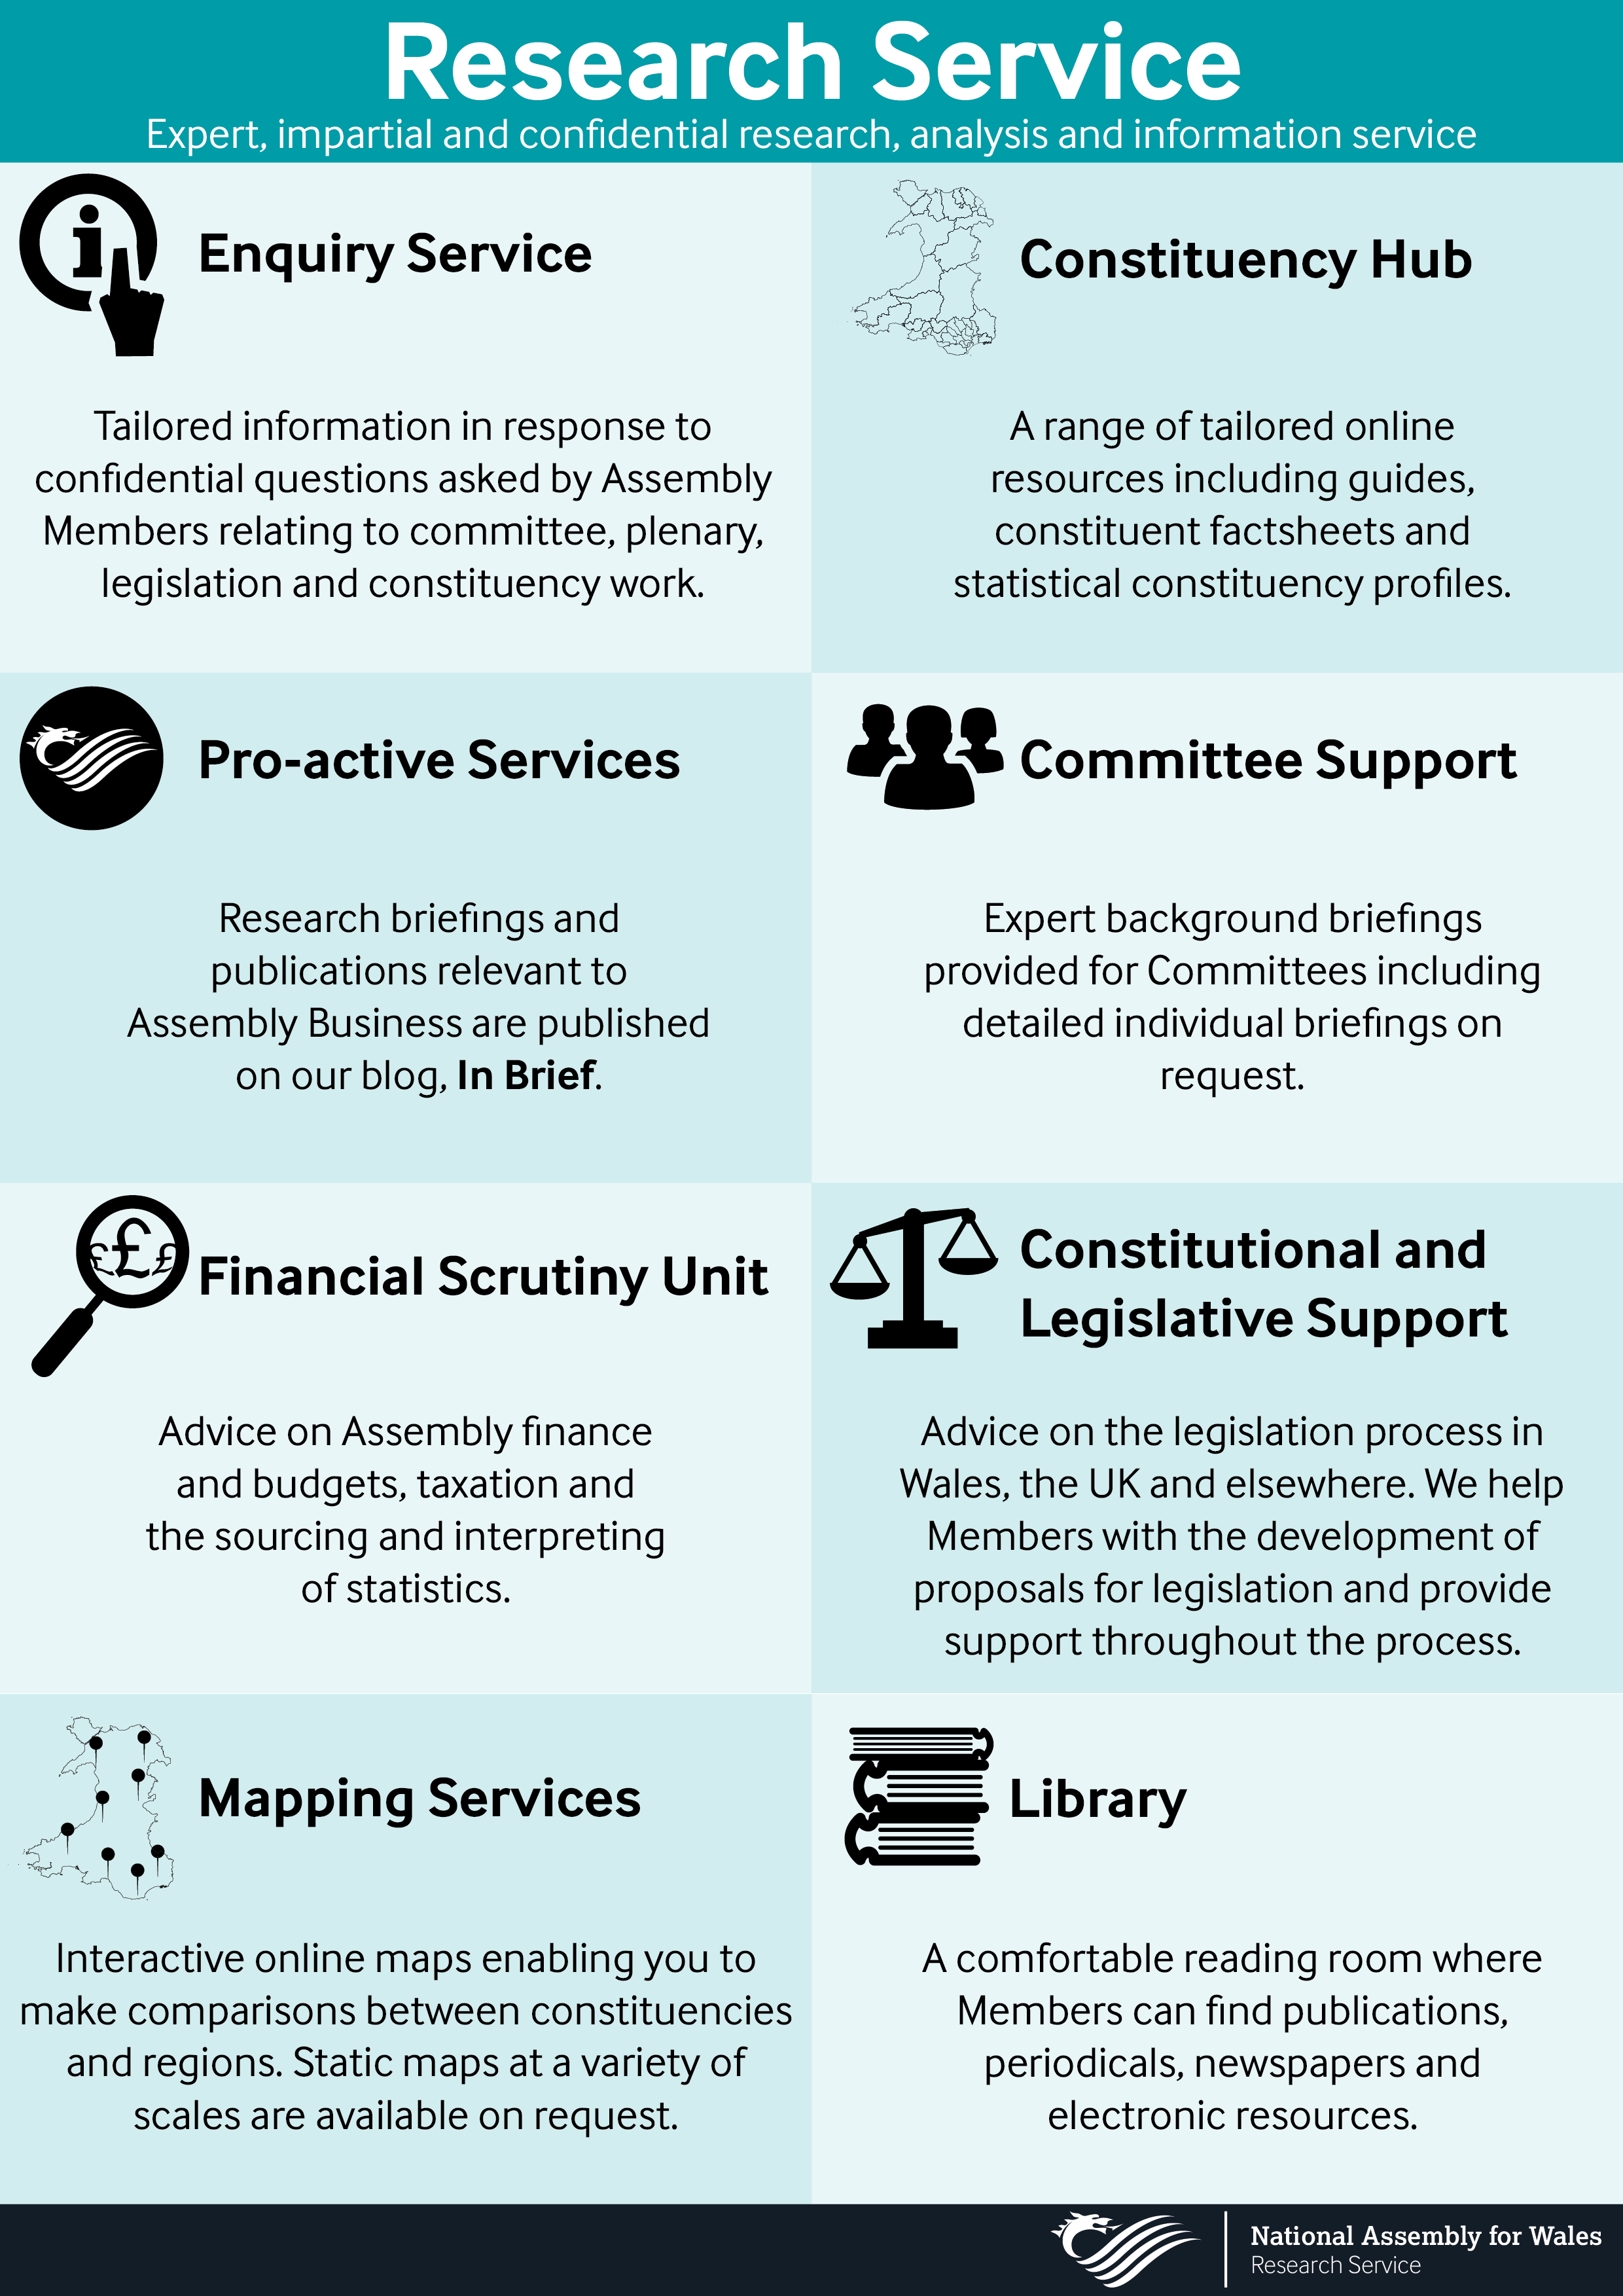 This is an infographic showing what the Research Service does.